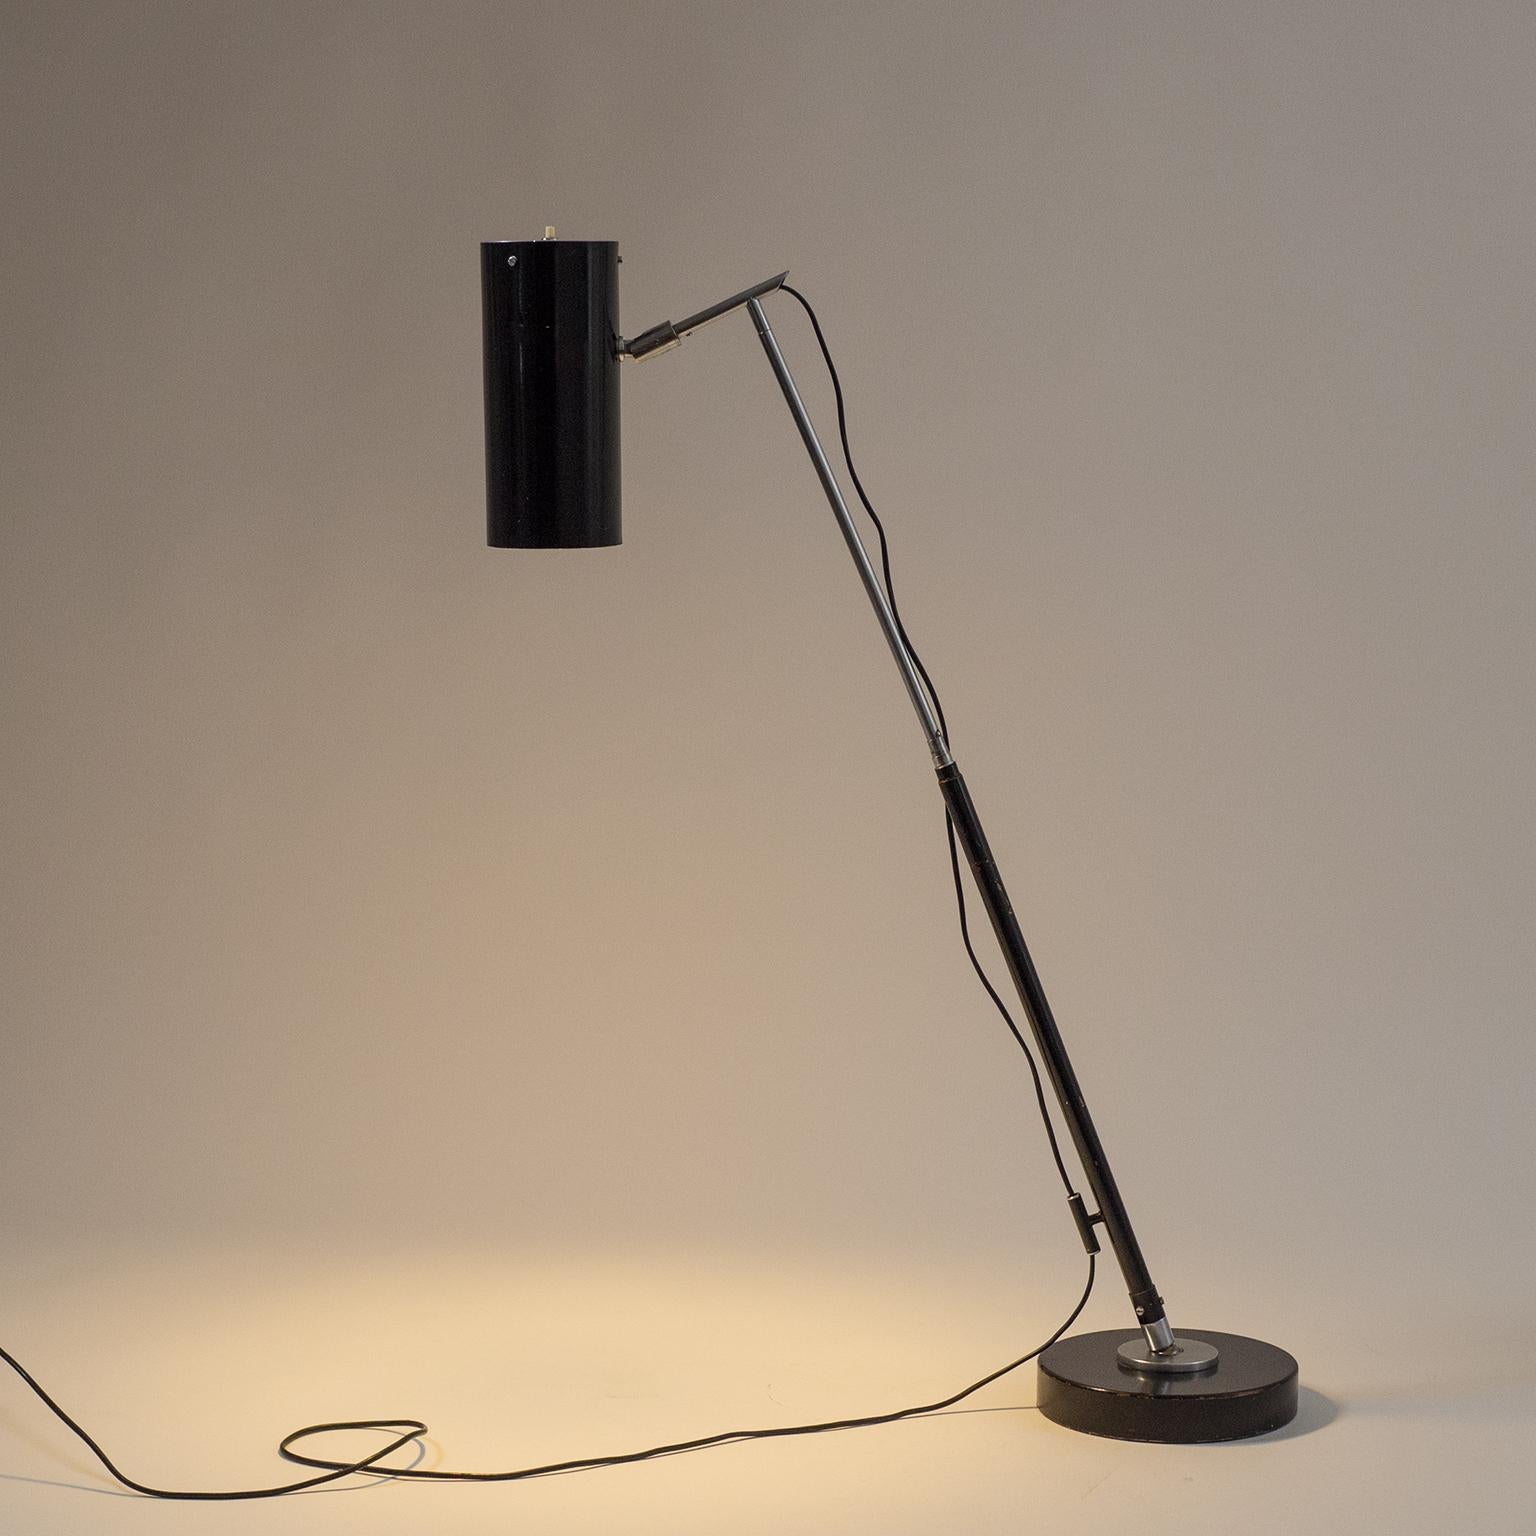 Mid-20th Century O'Luce 201 Telescopic Floor Lamp by Ostuni and Forti, circa 1950